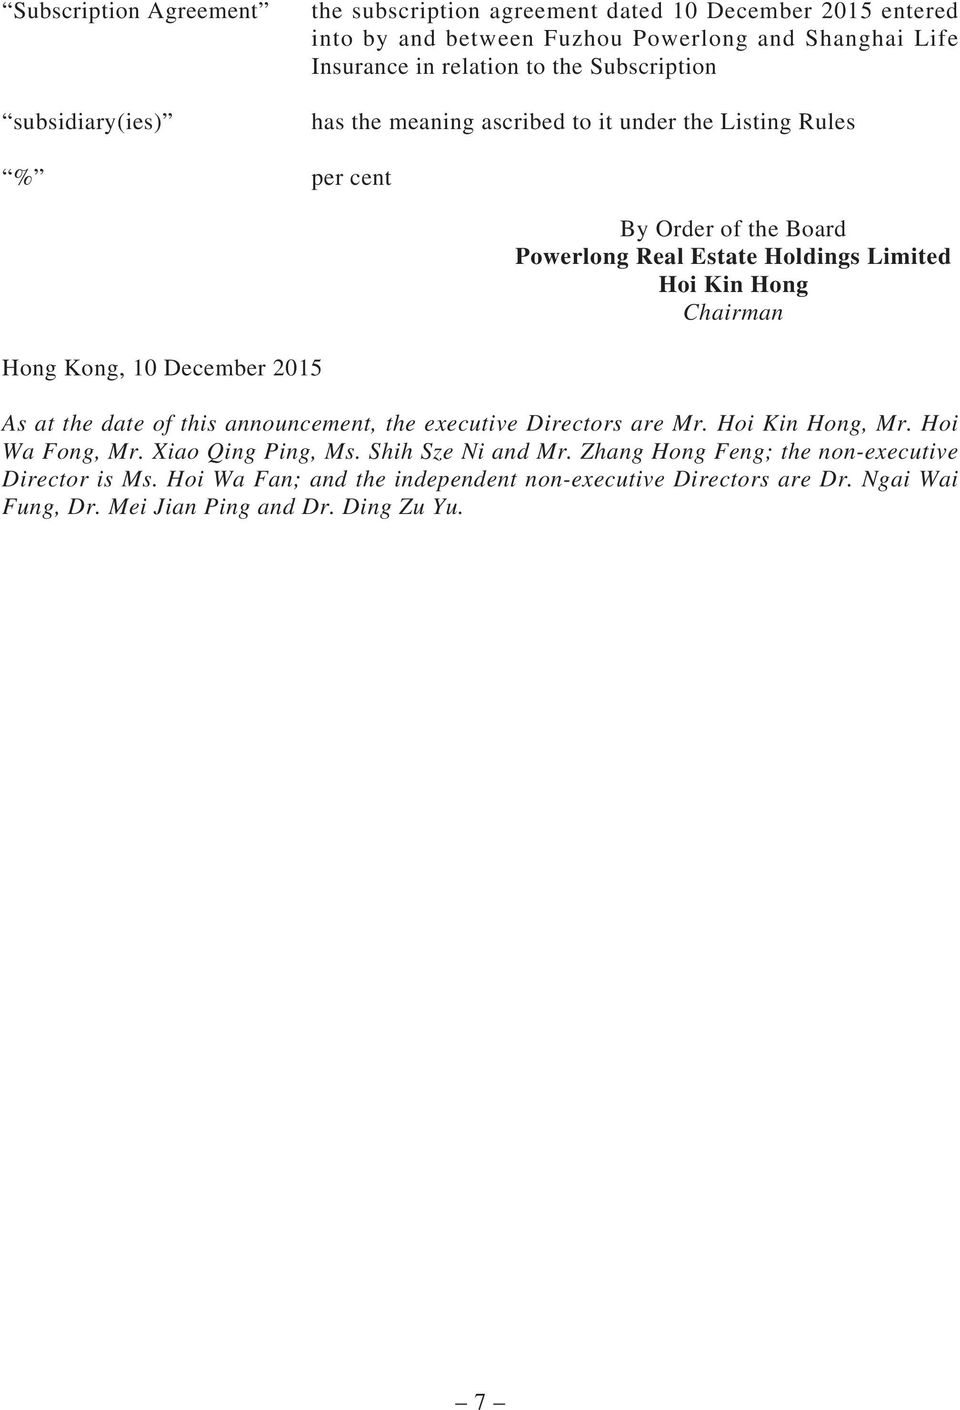 Chairman Hong Kong, 10 December 2015 As at the date of this announcement, the executive Directors are Mr. Hoi Kin Hong, Mr. Hoi Wa Fong, Mr. Xiao Qing Ping, Ms.